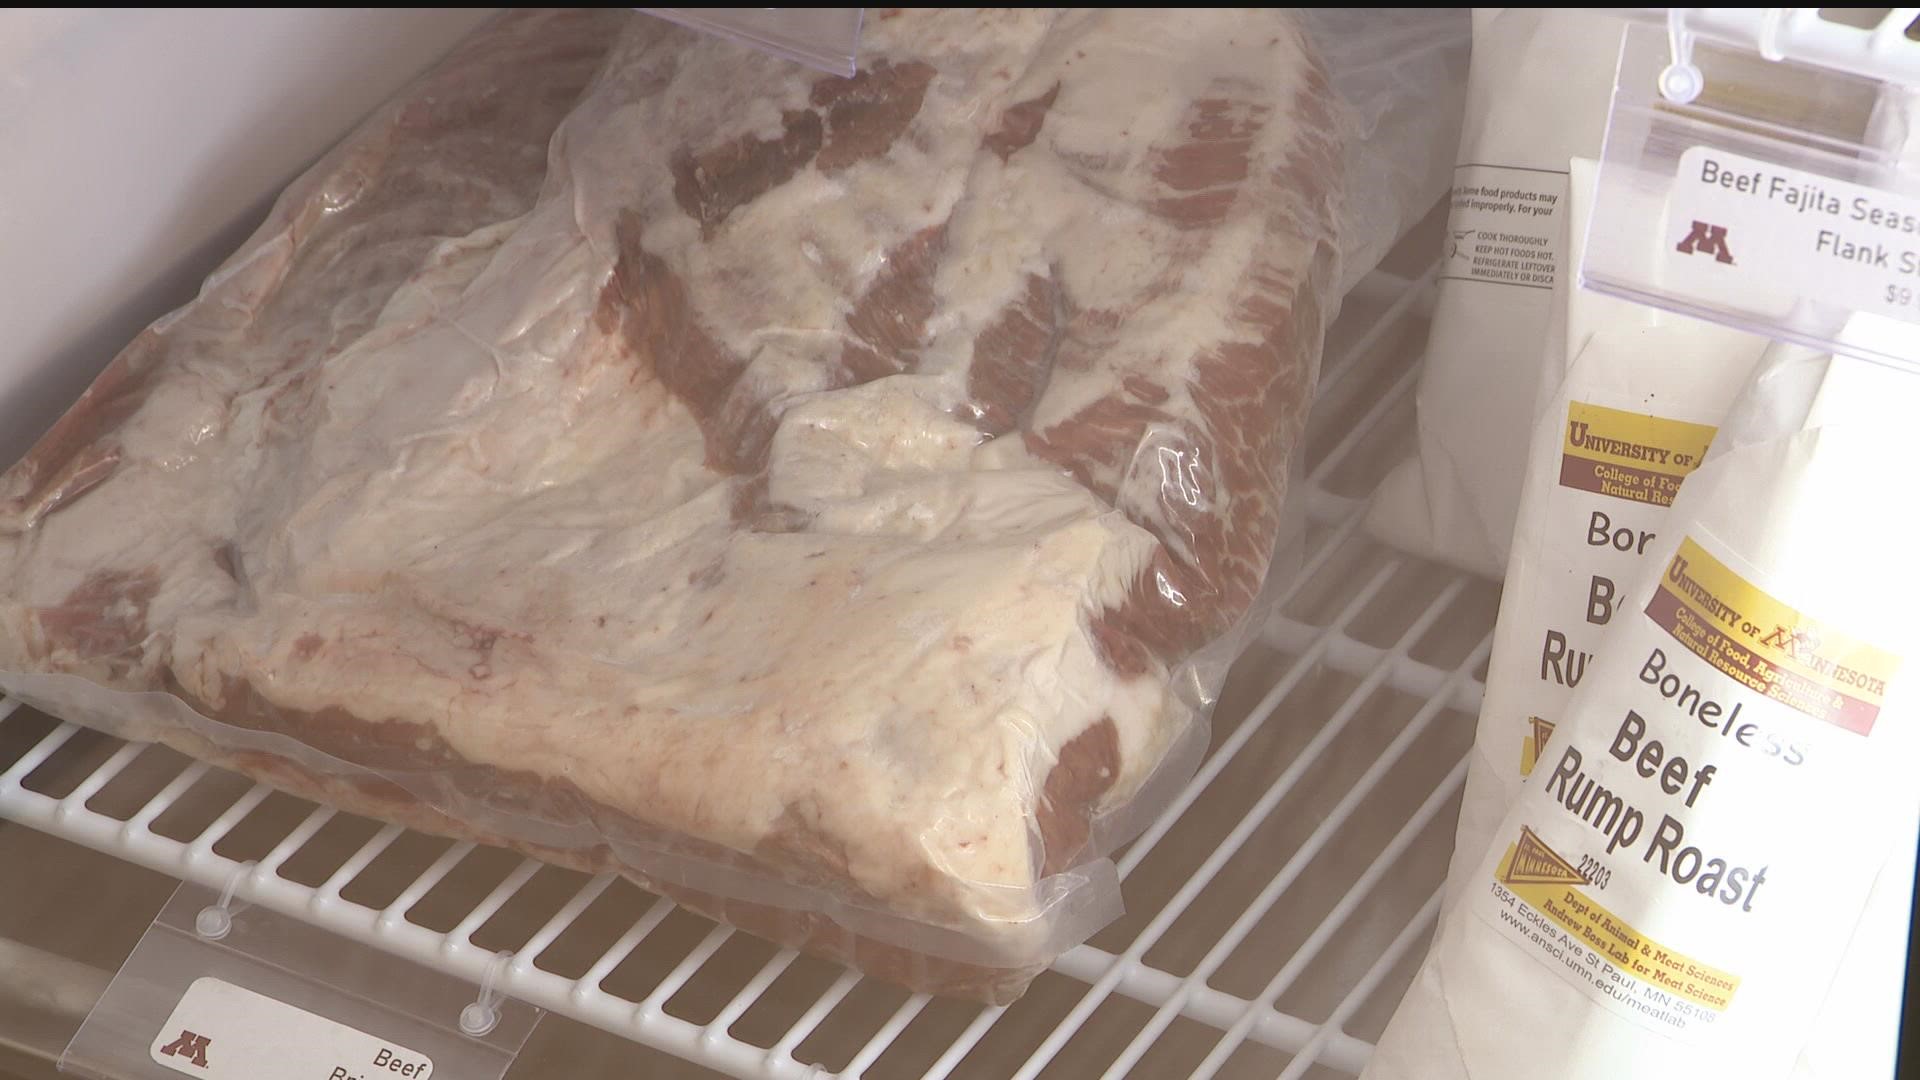 KARE 11 reporter Jennifer Austin found out the hype about the University of Minnesota's meat and dairy salesroom.